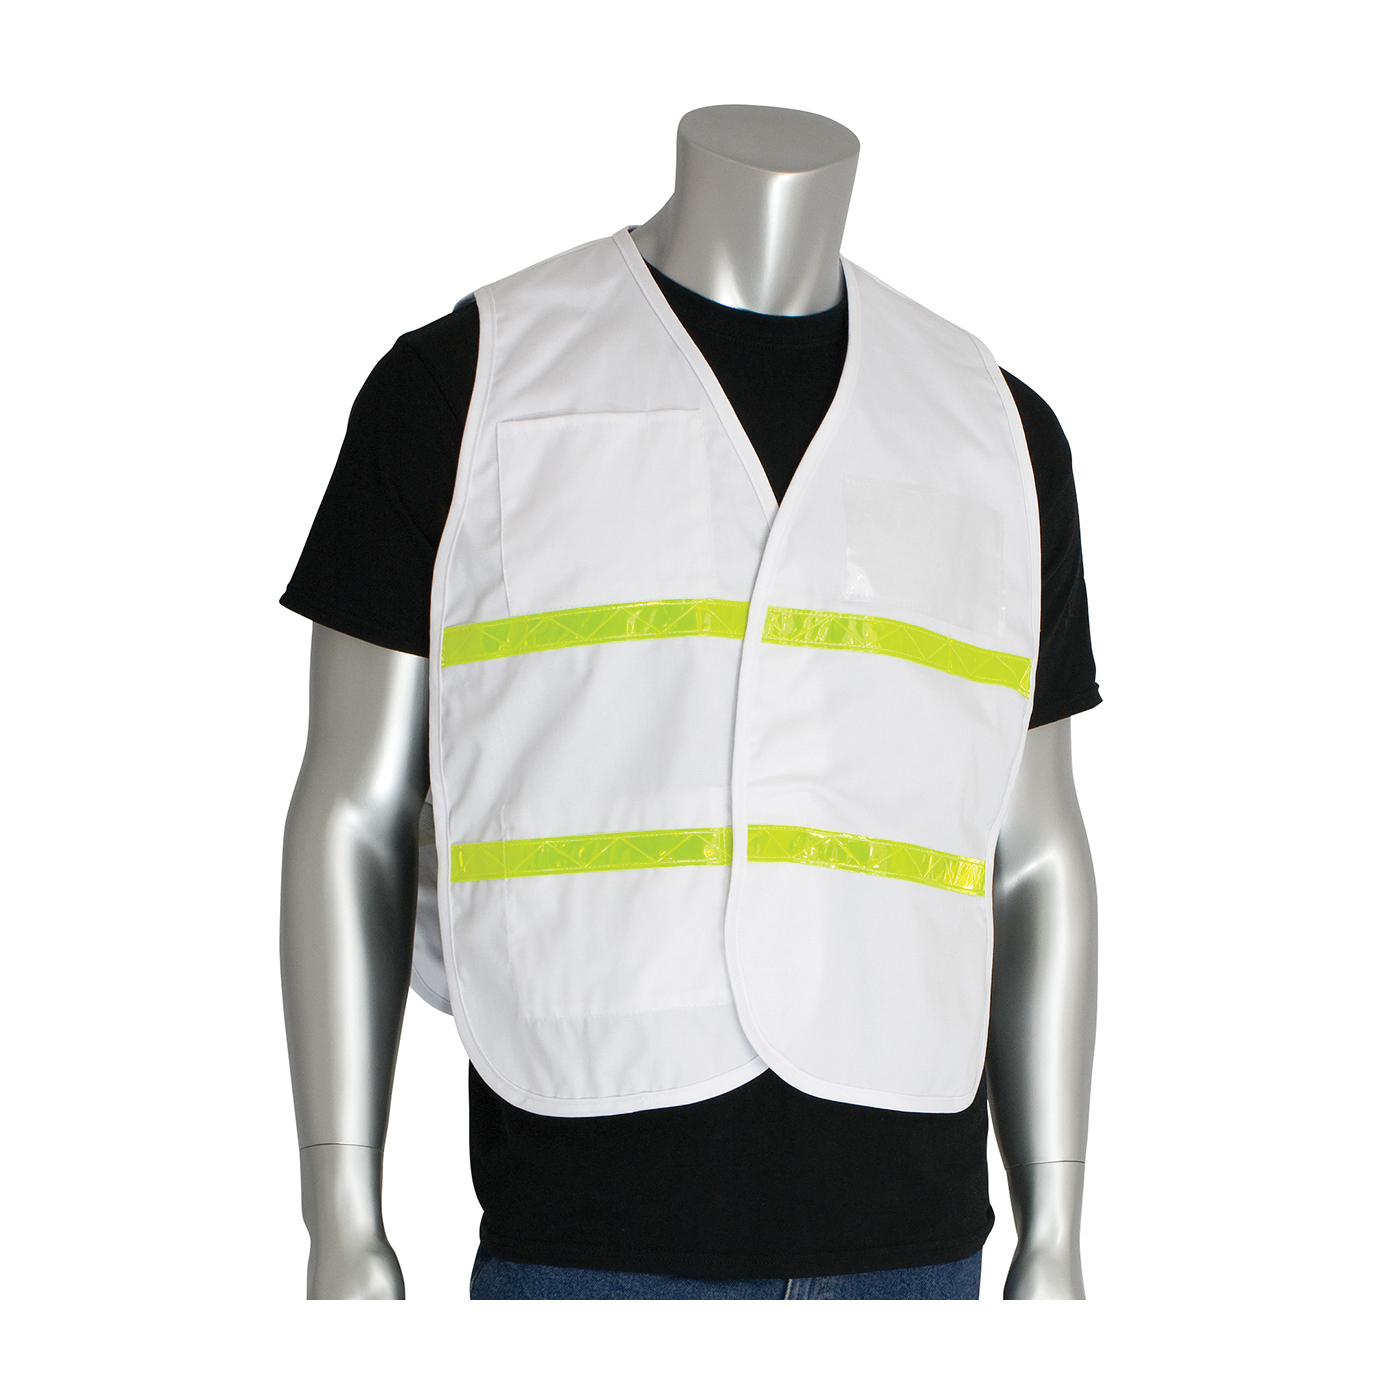 PIP® 300-2511/M-XL 300-2500 Non-ANSI Incident Command Vest, M/XL, White, 35% Cotton/65% Polyester, Hook and Loop Closure, 4 Pockets